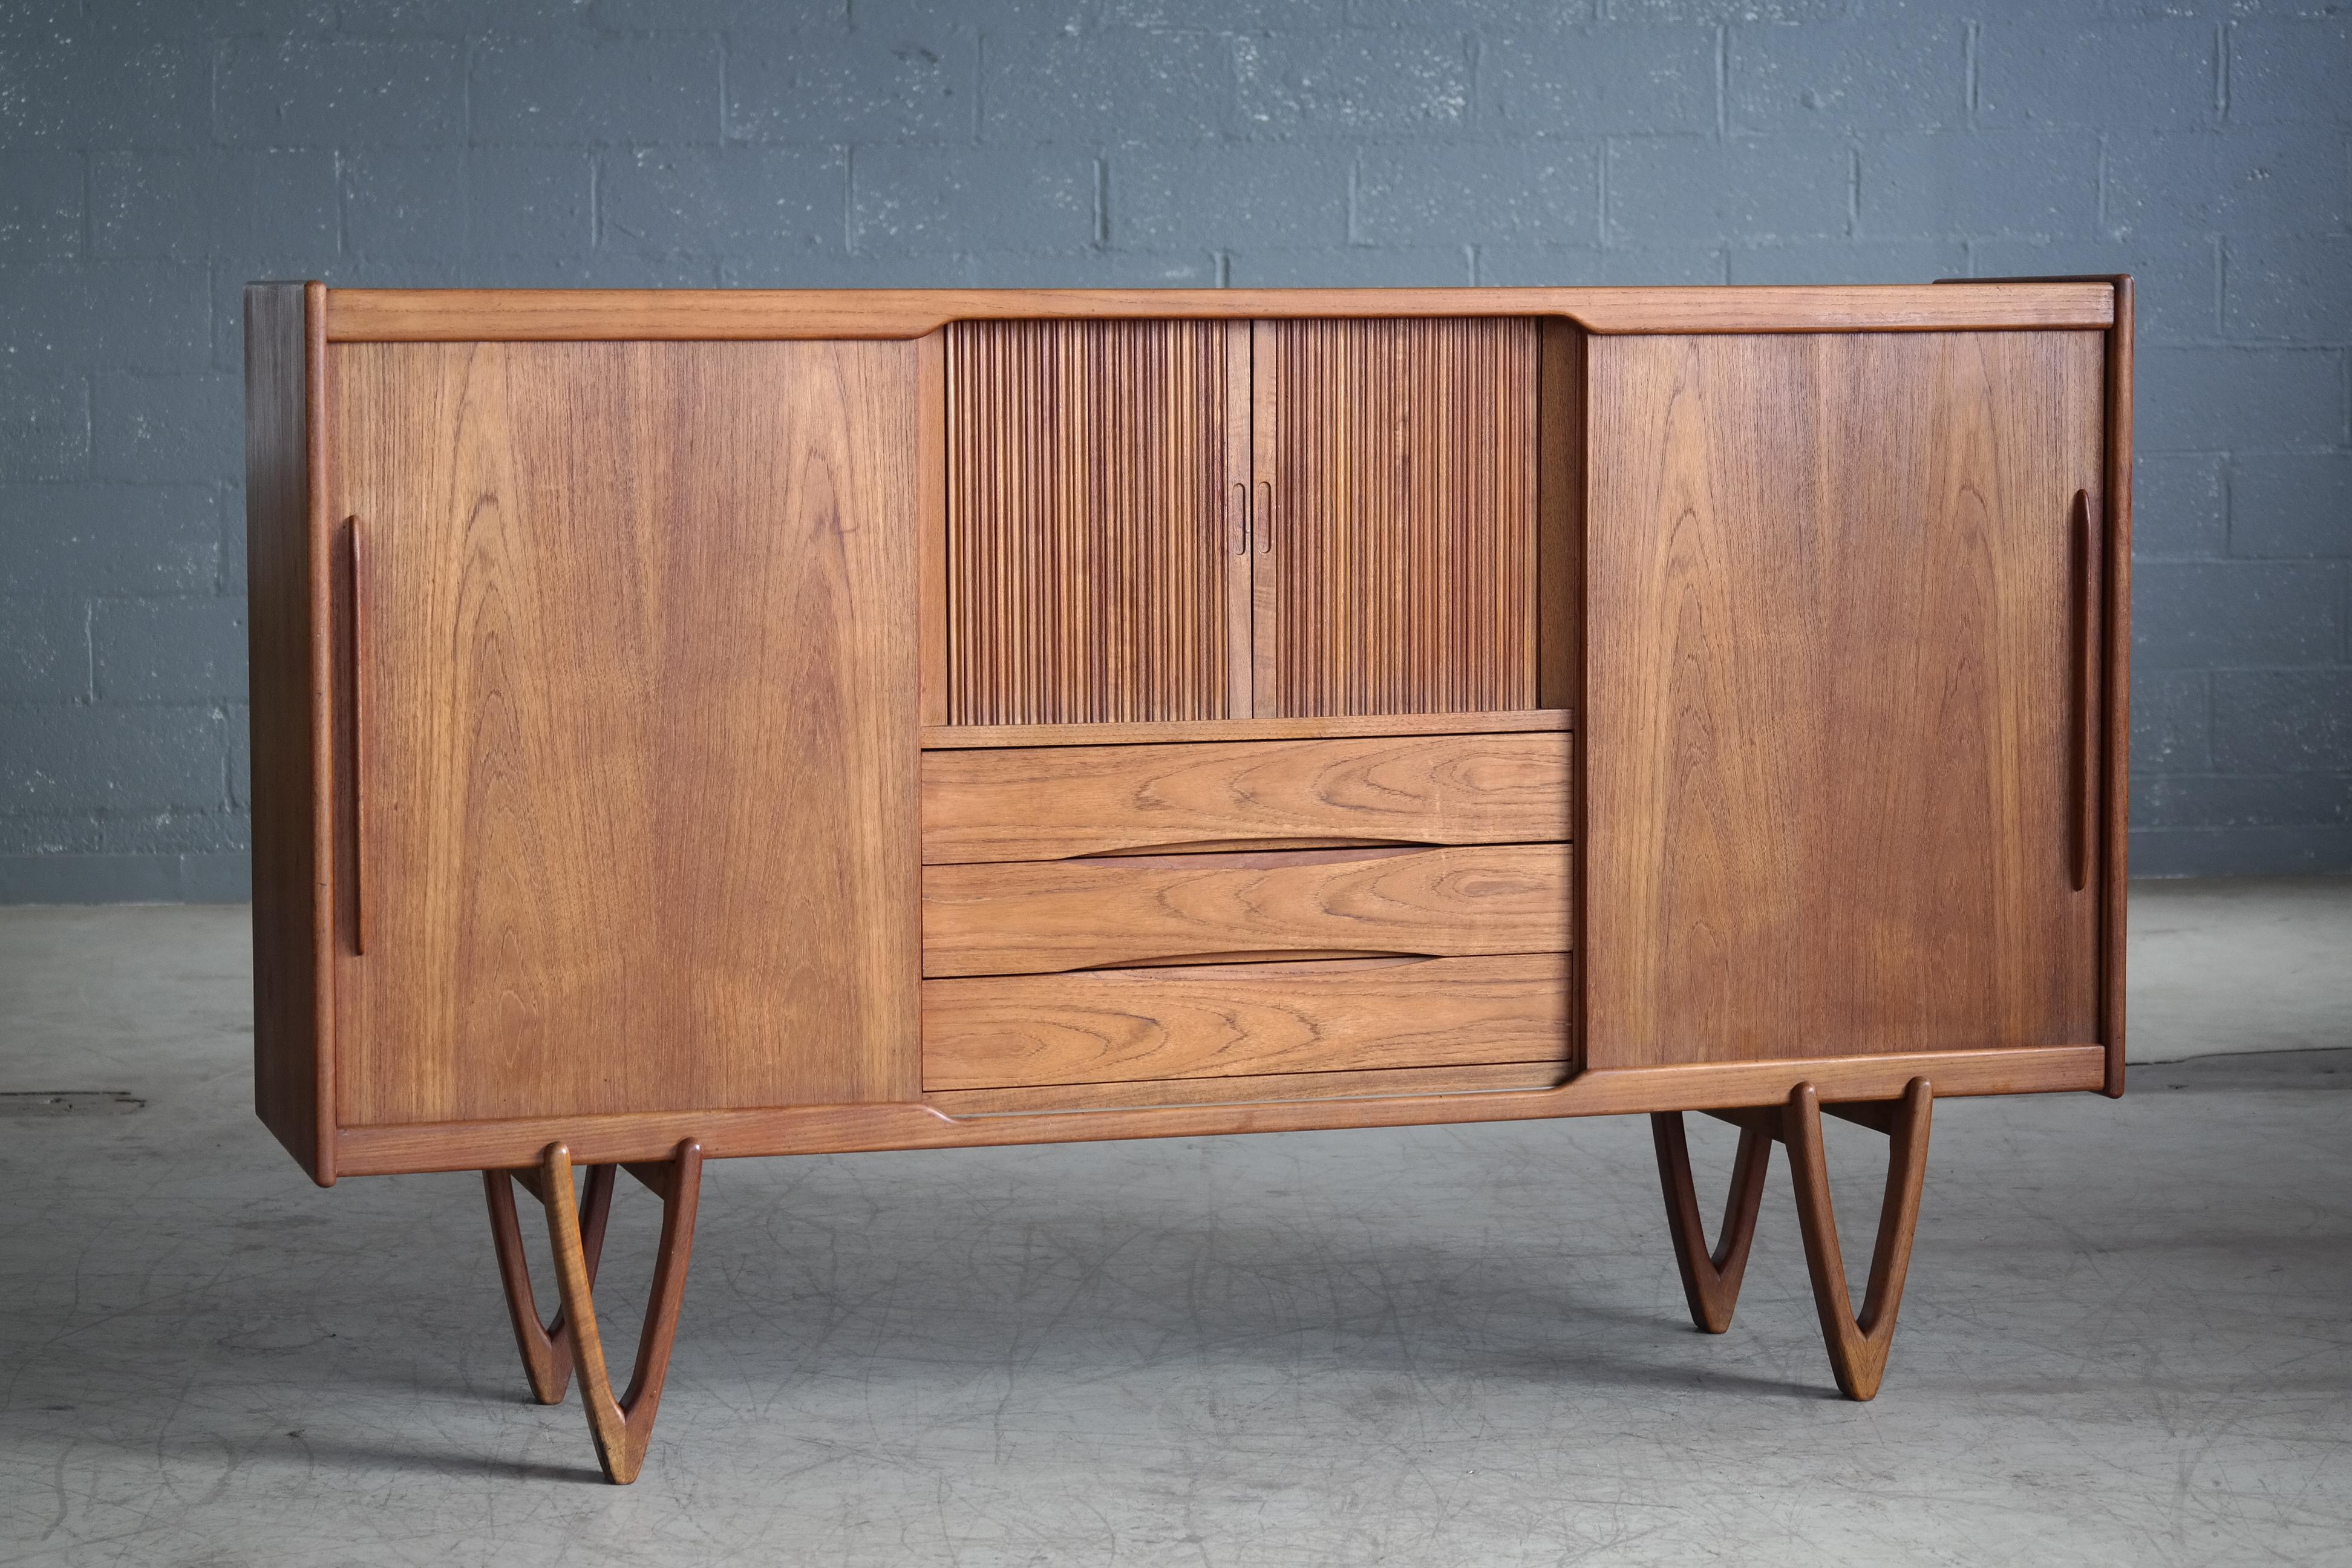 Fantastic Danish highboard manufactured in the late 1950s. Elegant timeless design piece with a nice size and presence about it without being imposing. The build quality is of the highest caliber with all veneers are solid ply with no use of